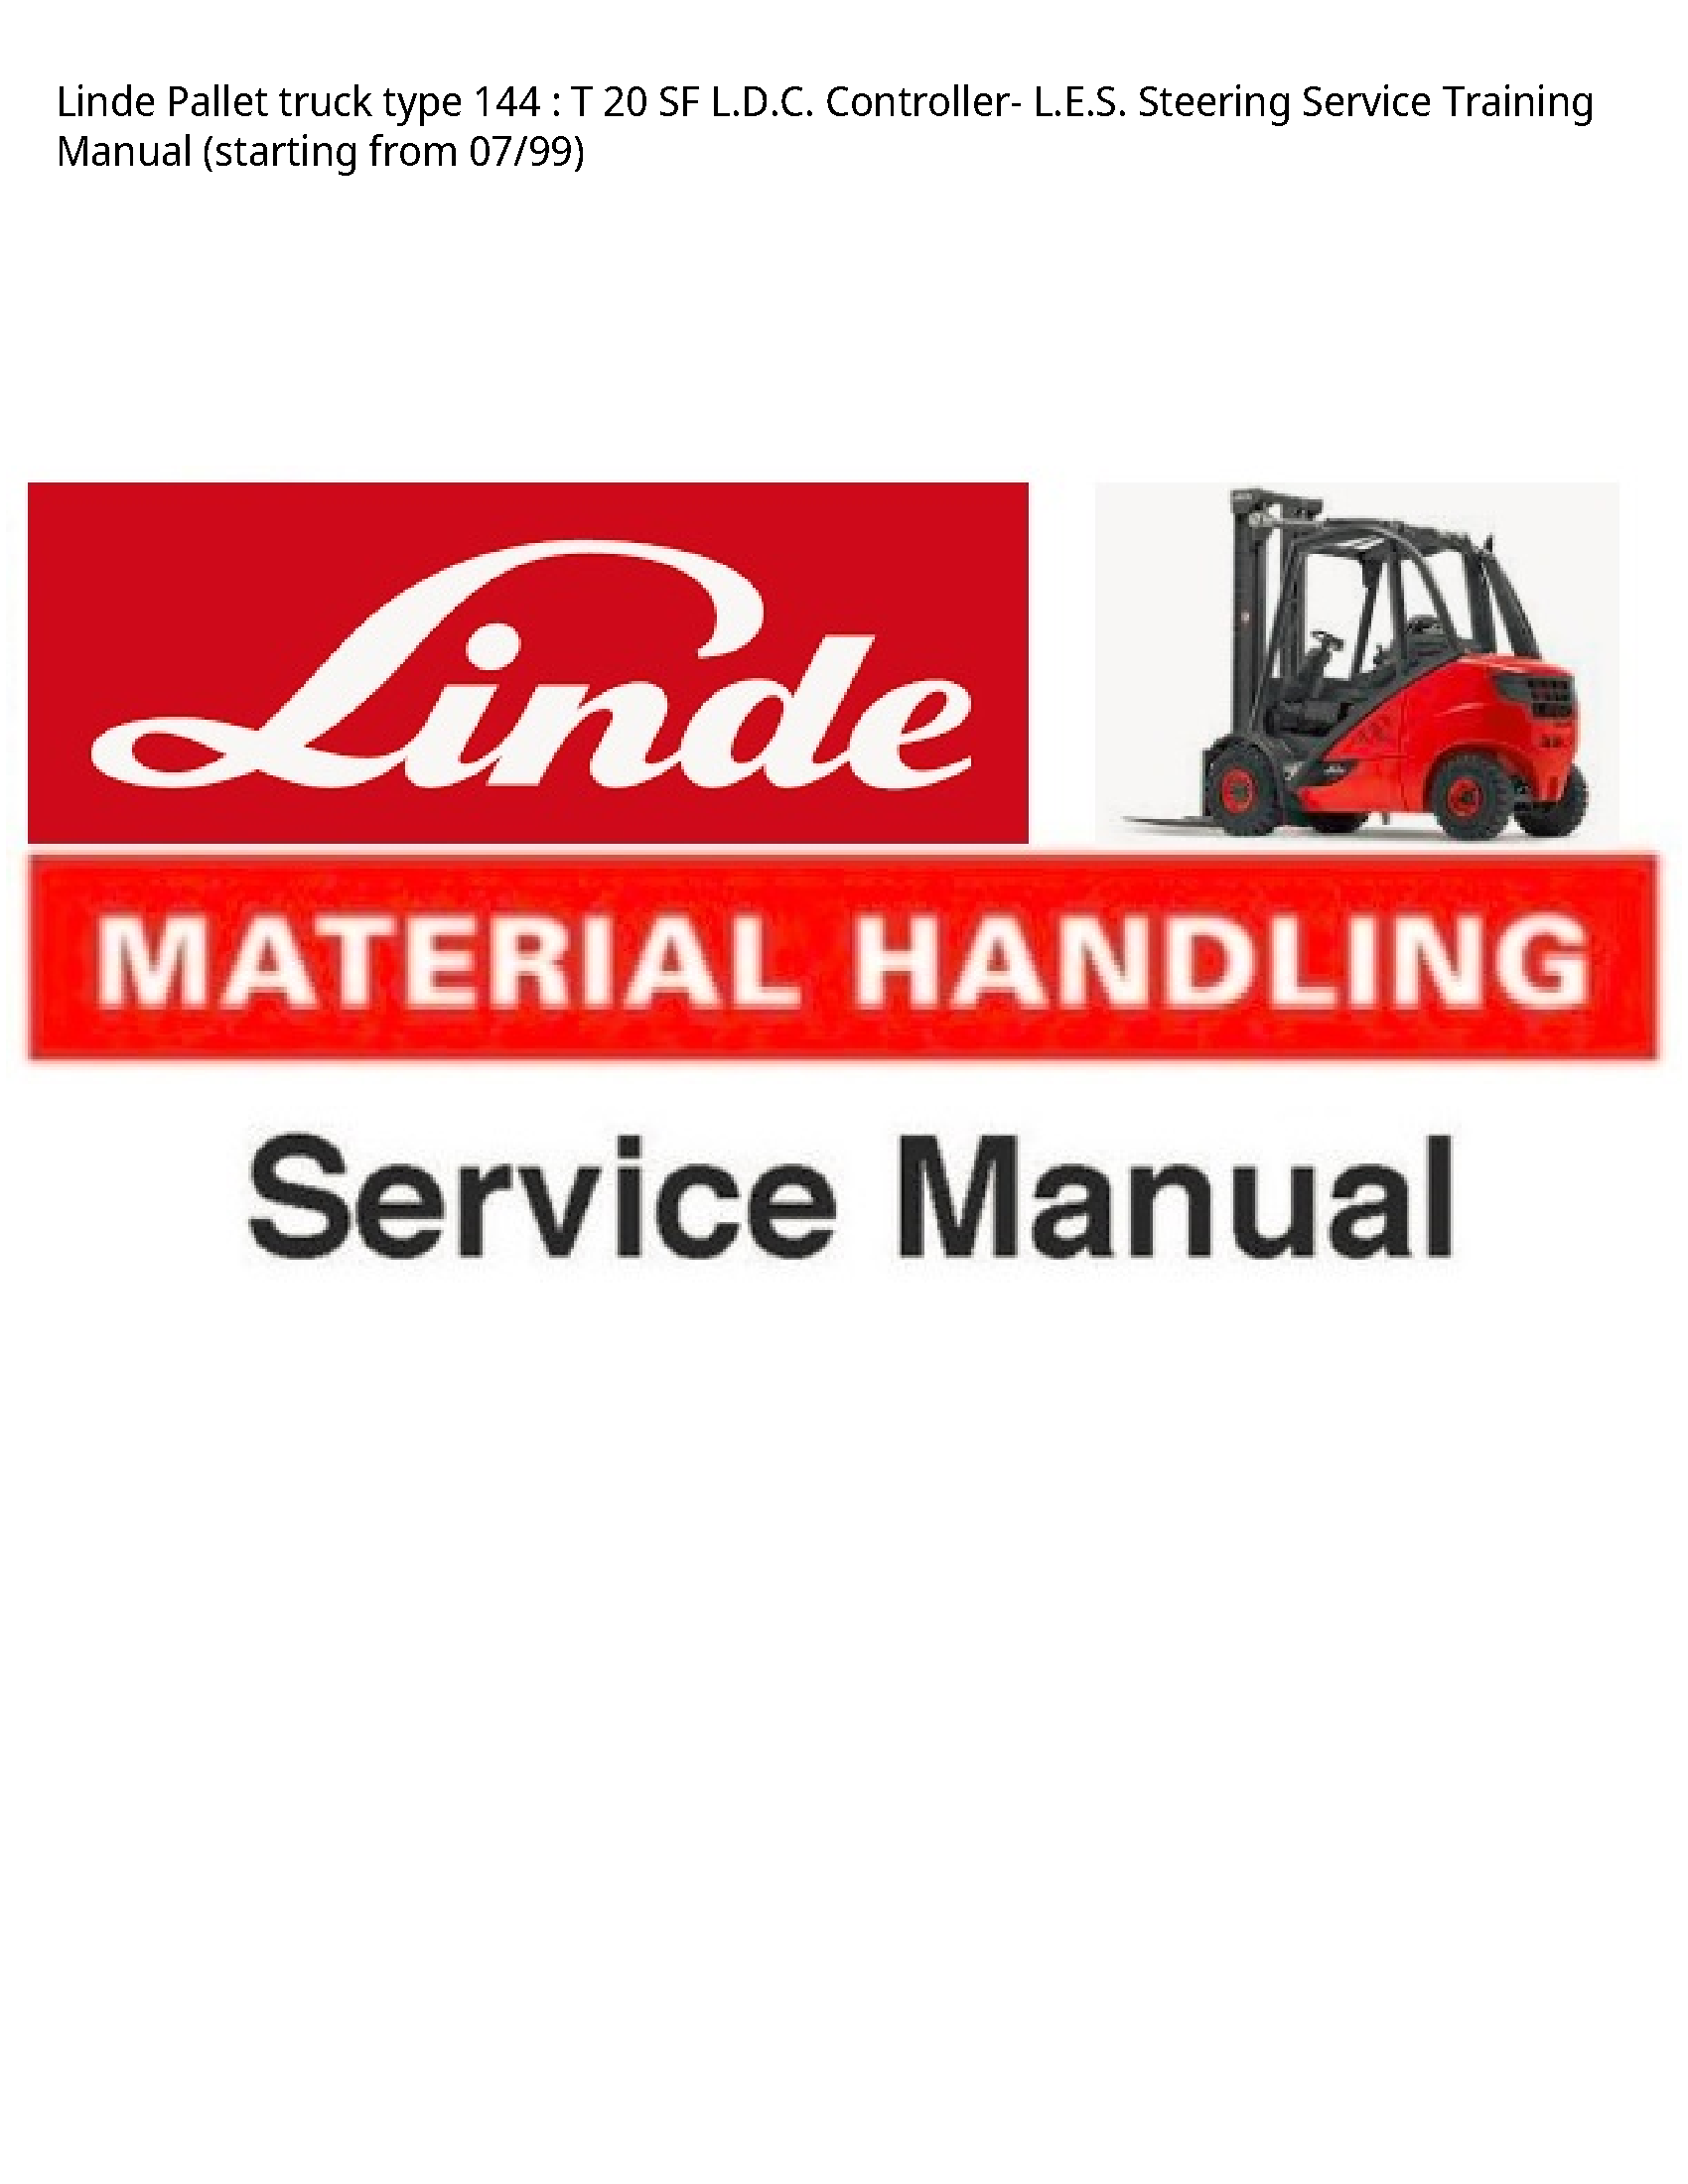 Linde 144 Pallet truck type SF L.D.C. Controller- L.E.S. Steering Service Training manual